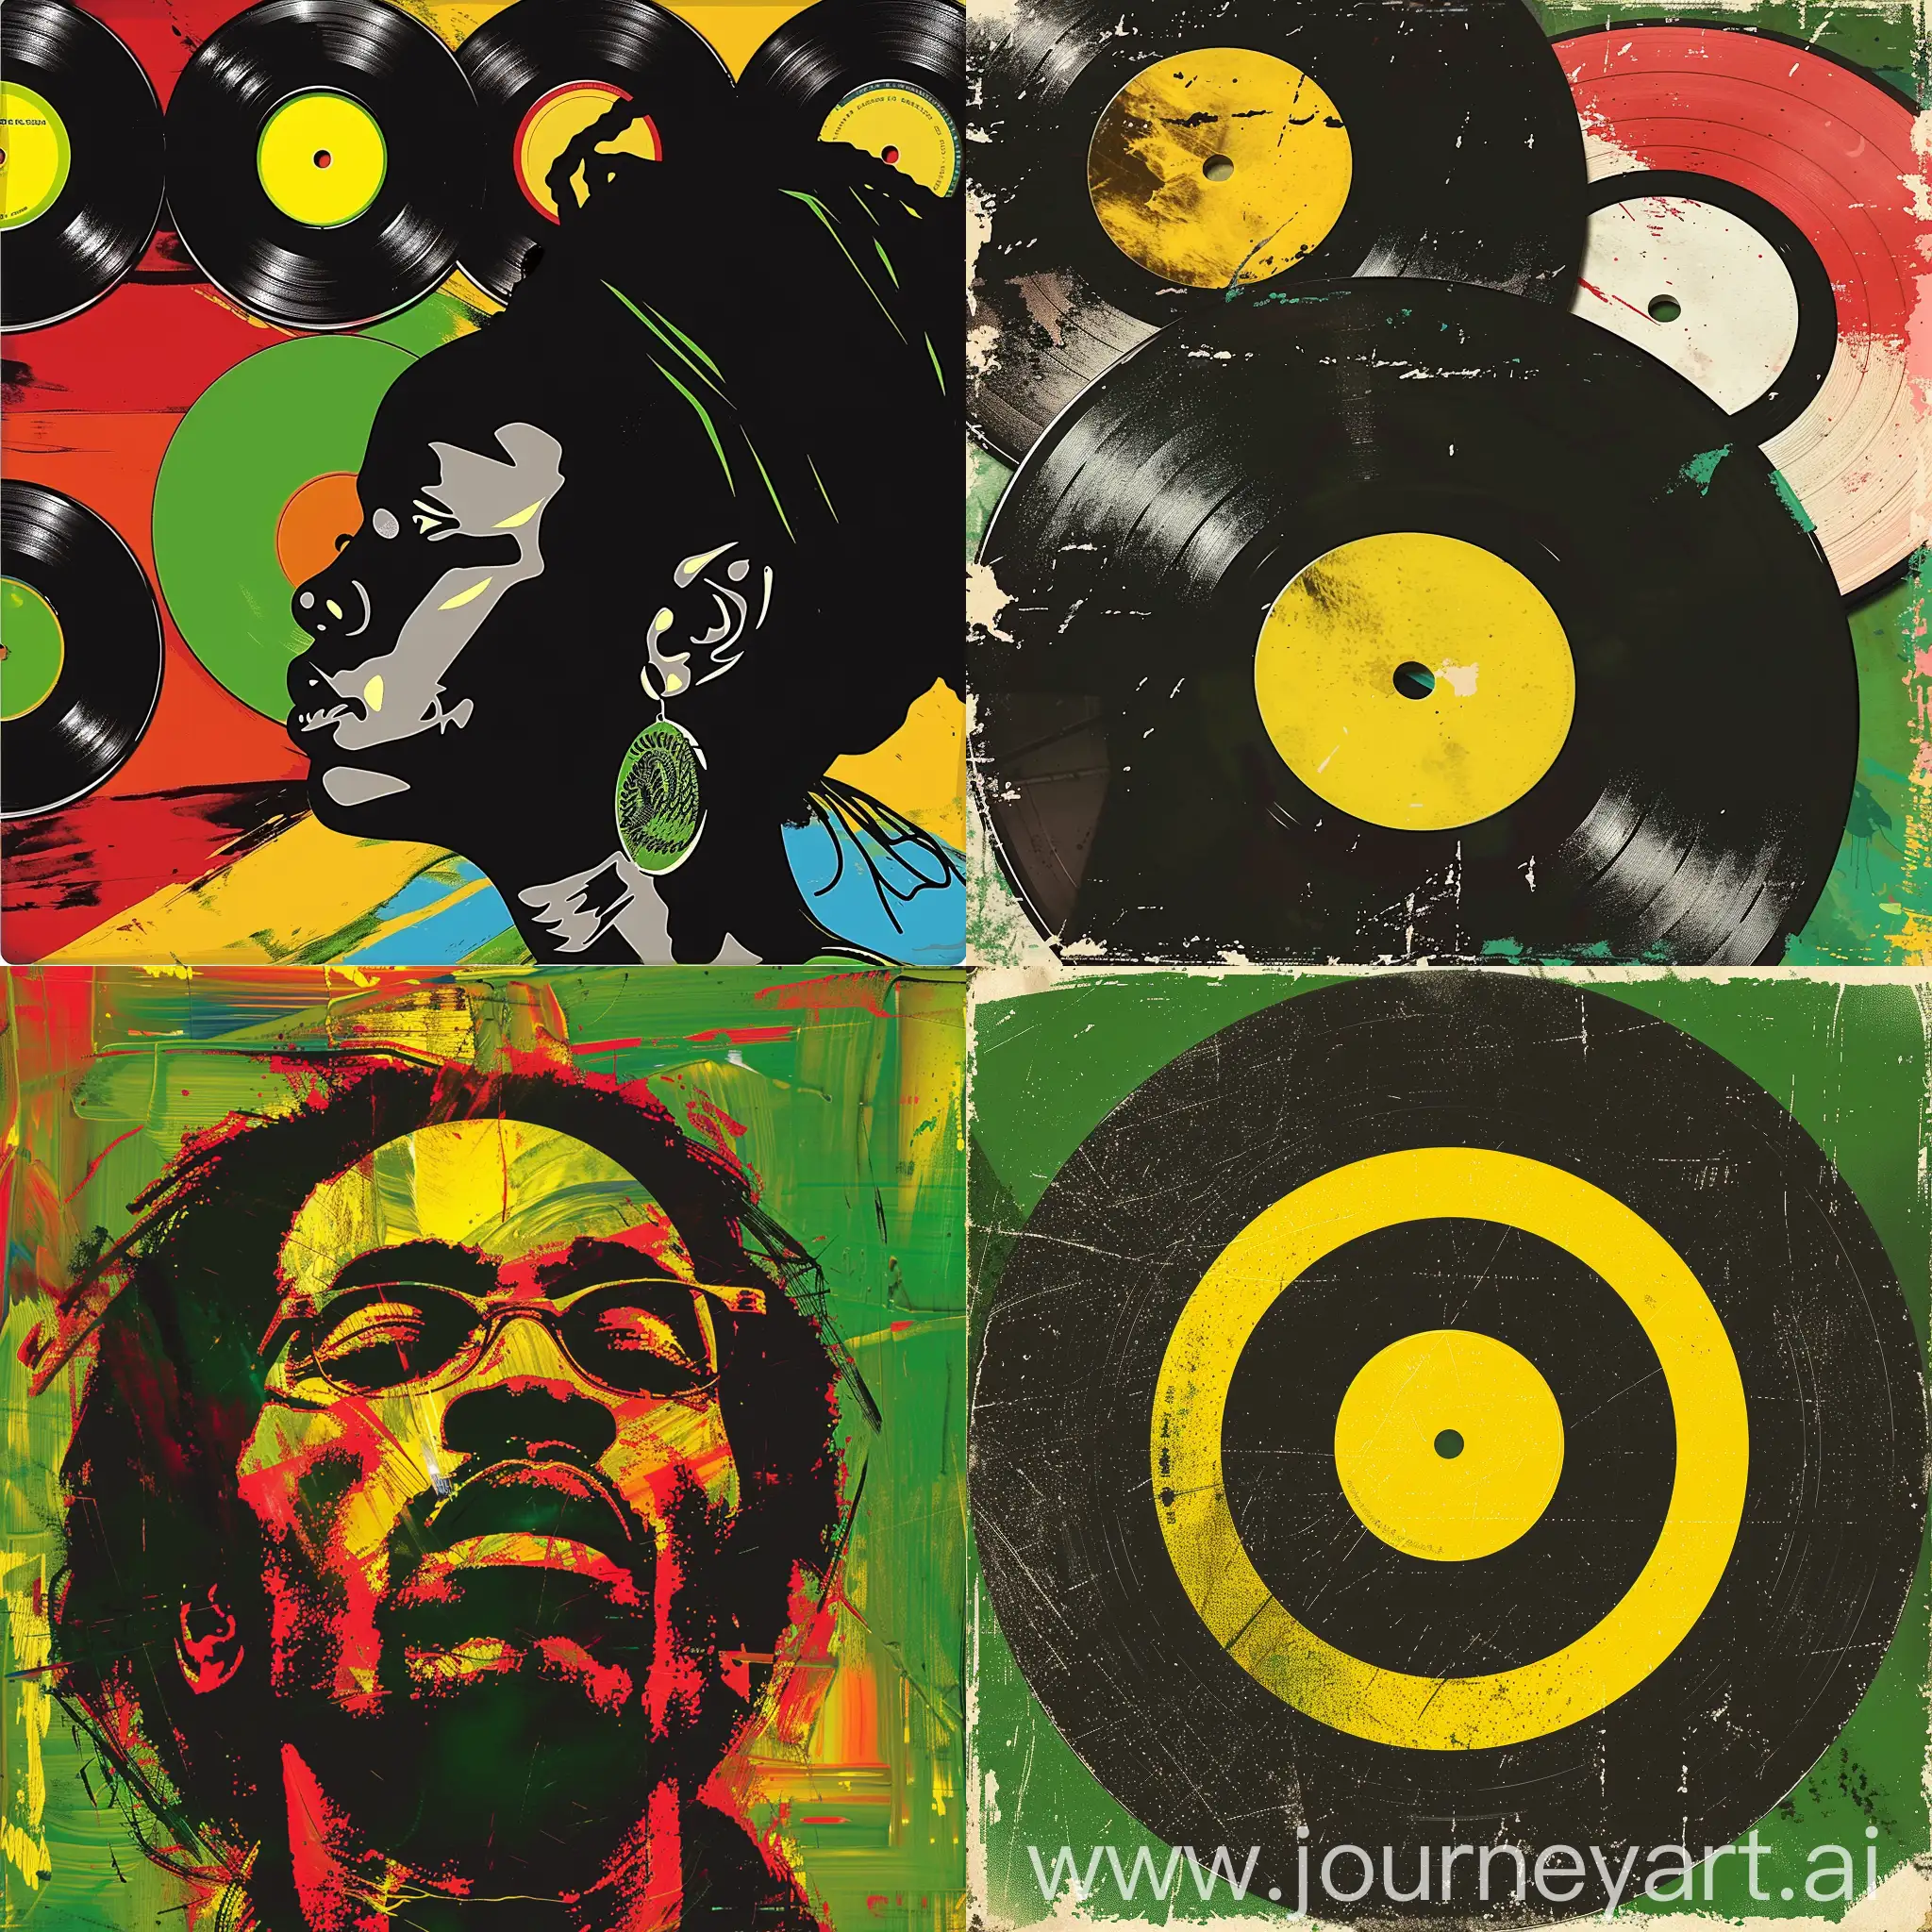 generate vinyl cd cover art in the late 60s jamaican style